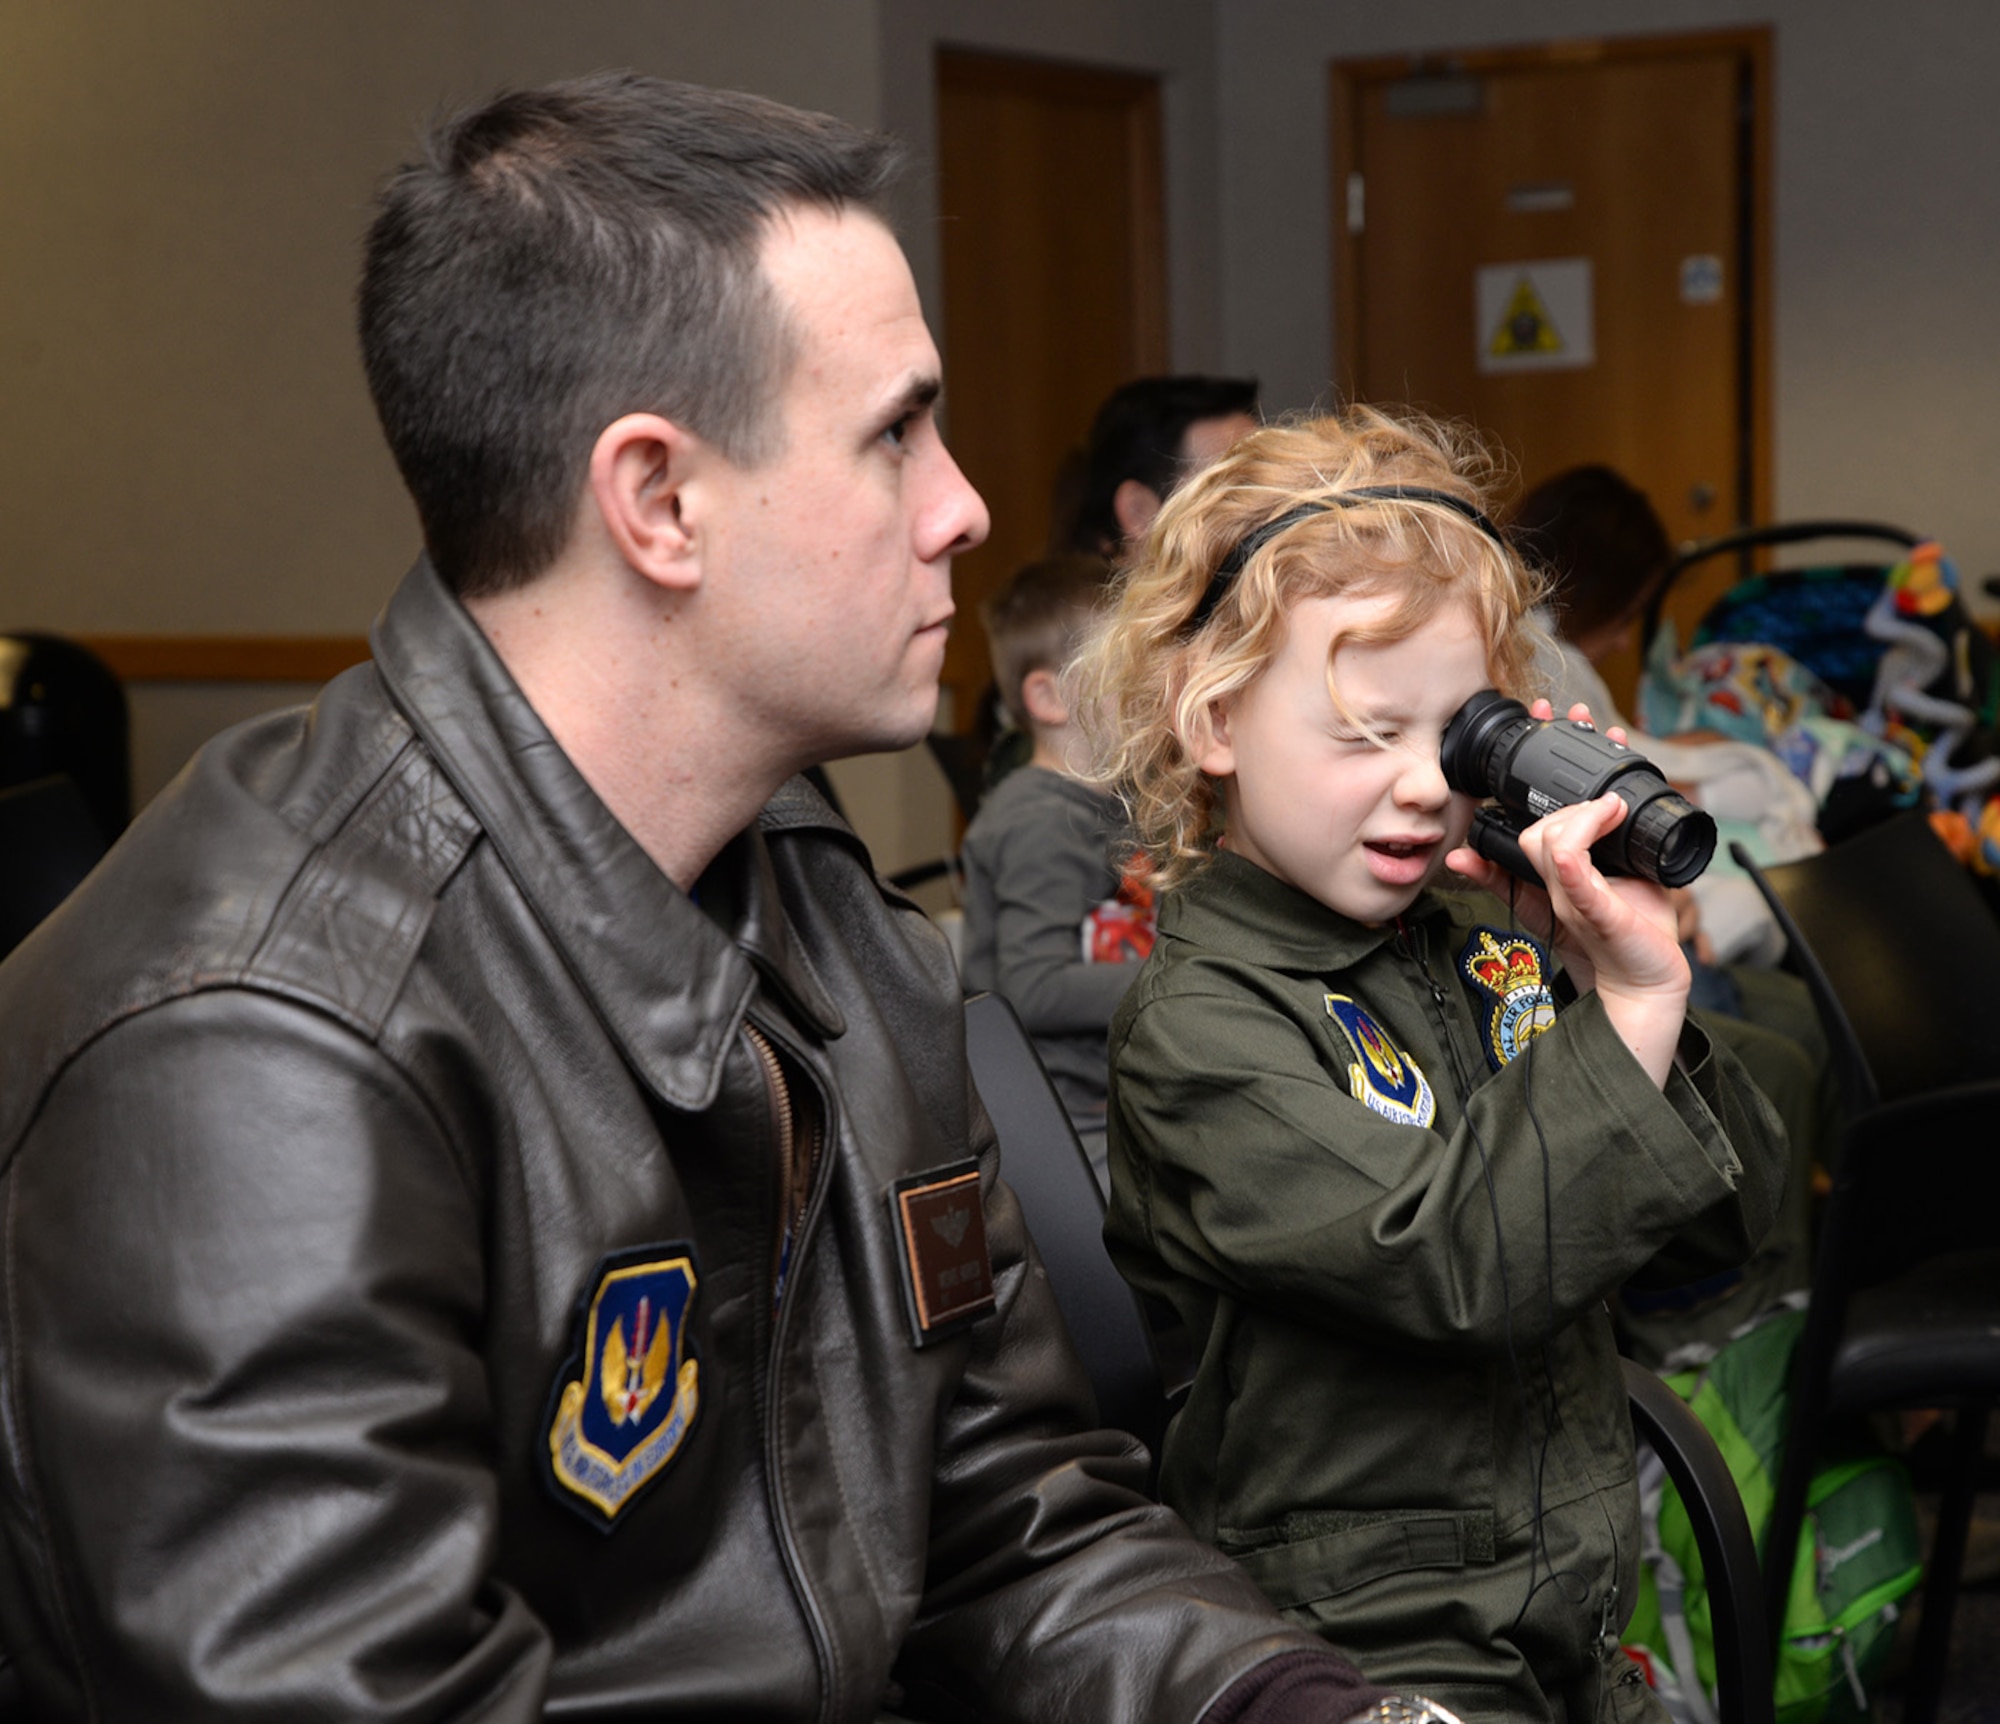 U.S. Air Force Maj. Michael Harrison, left, 100th Operations Support Squadron assistant director of operations, listens to a survival, evasion, resistance and escape instructor as his daughter Isabella, 5, checks out a night-vision monocular at the 100th Operations Group “Bring Your Child to Work Day” as part of Month of the Military Child April 28, 2017, on RAF Mildenhall, England. During the kid-friendly SERE training, children tried on equipment including helmets, and had their faces painted with camouflage pattern. (U.S. Air Force photo by Karen Abeyasekere) 